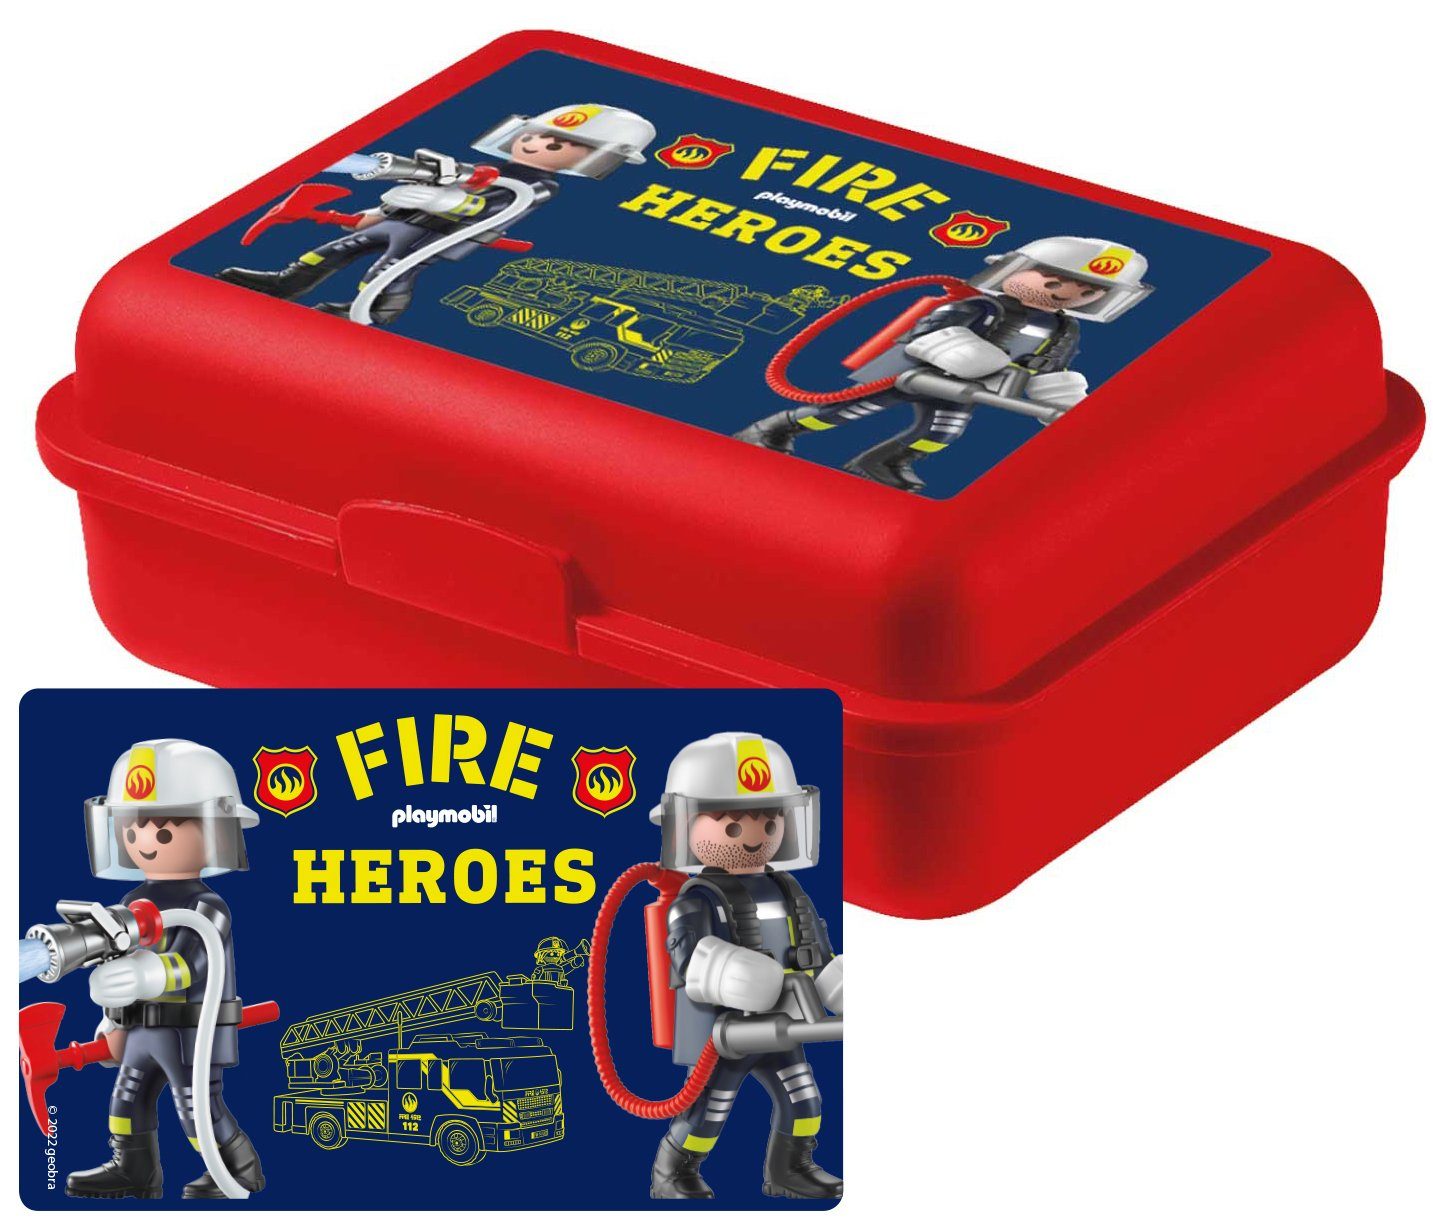 City Trennwand Feuerwehr Action Labels® mit Brotdose Playmobil - Lunchbox Rot, Kunststoff Lunchbox (PP) United